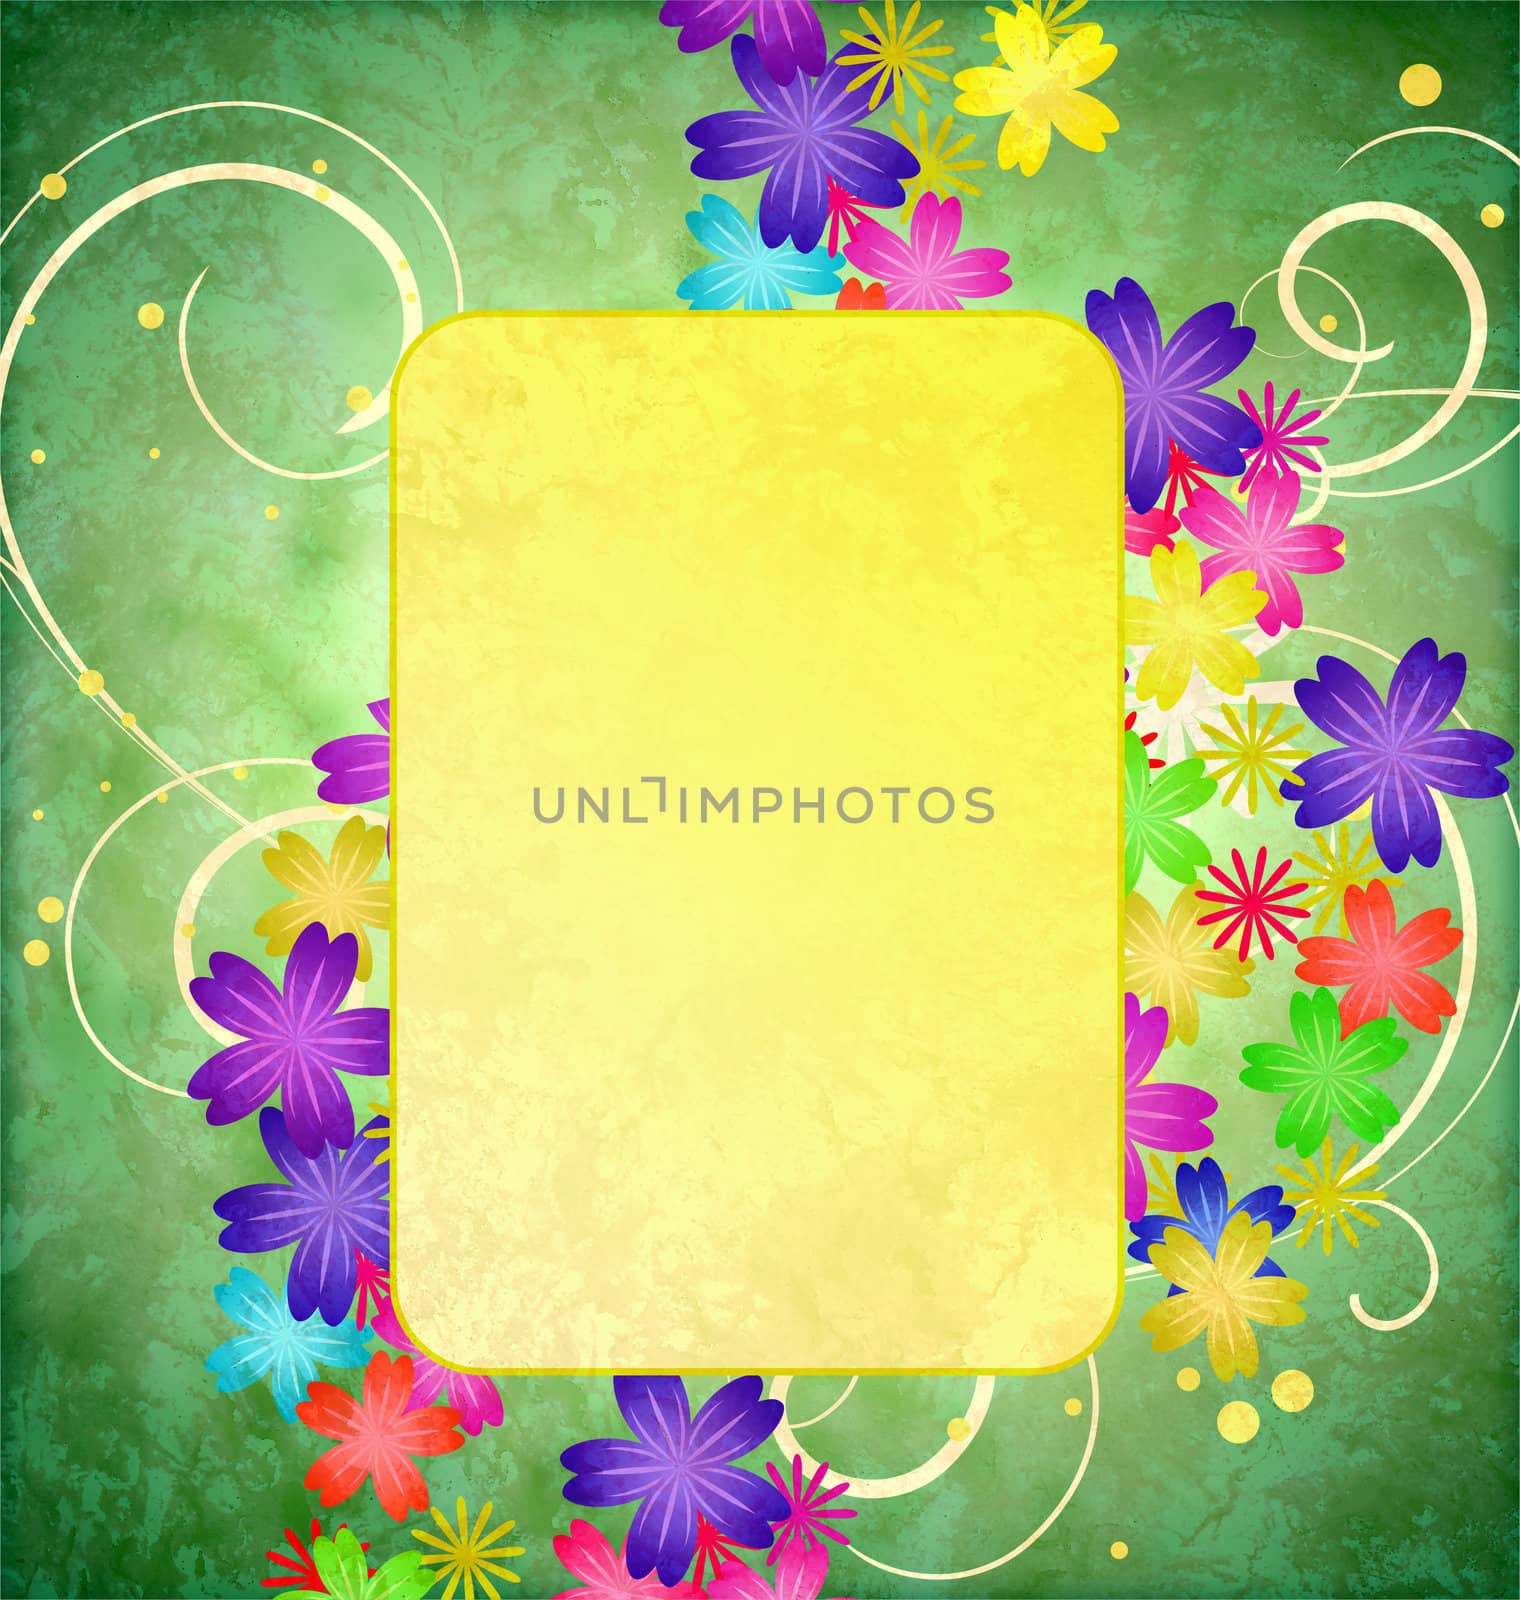 colorful flowers flourishes frame on green grunge background vin by CherJu